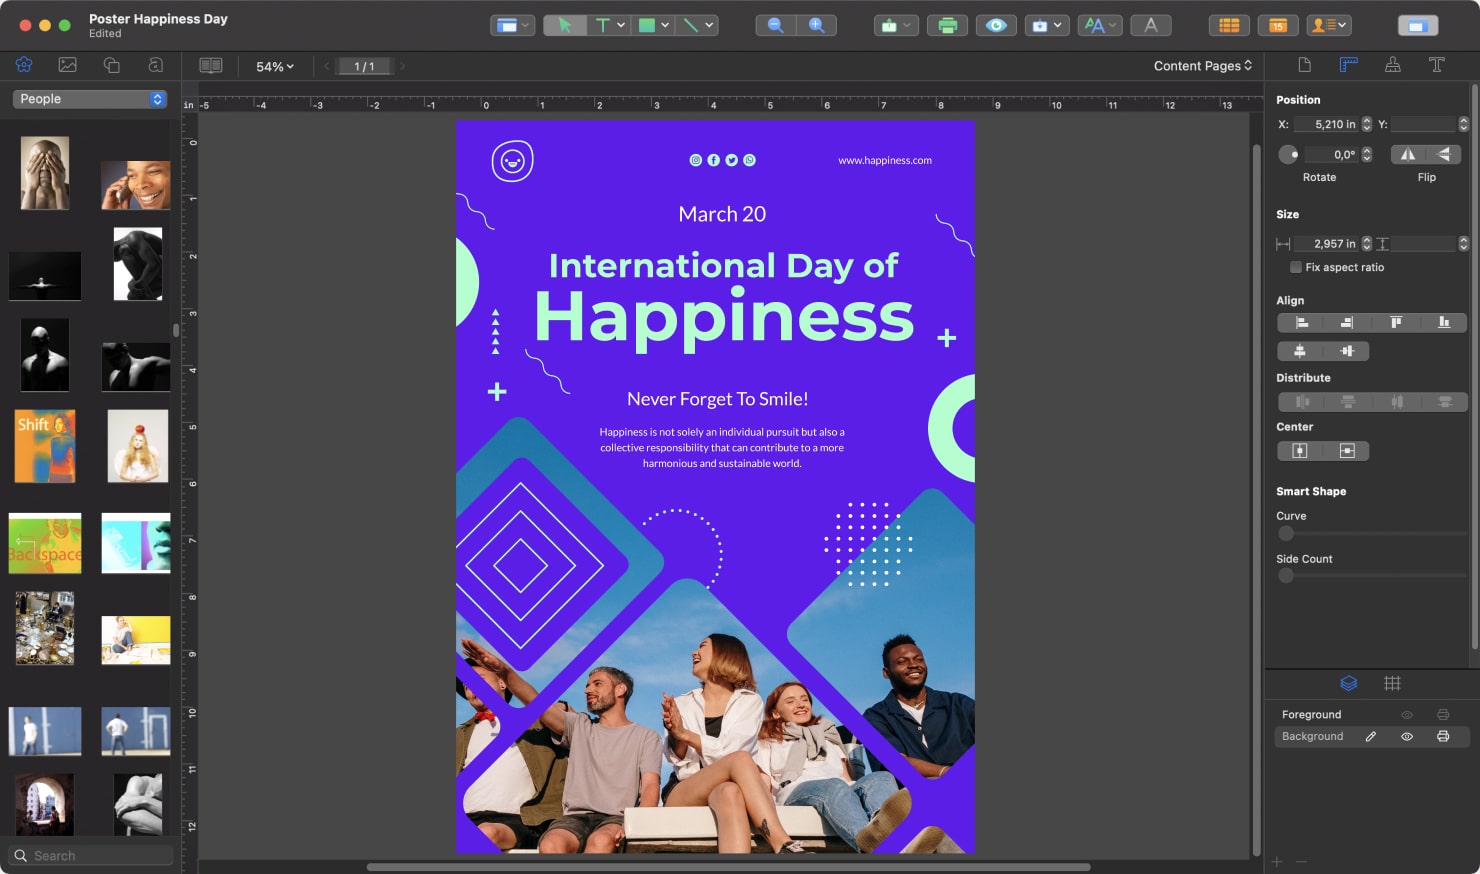 Swift Publisher interface with International Happiness Day poster.